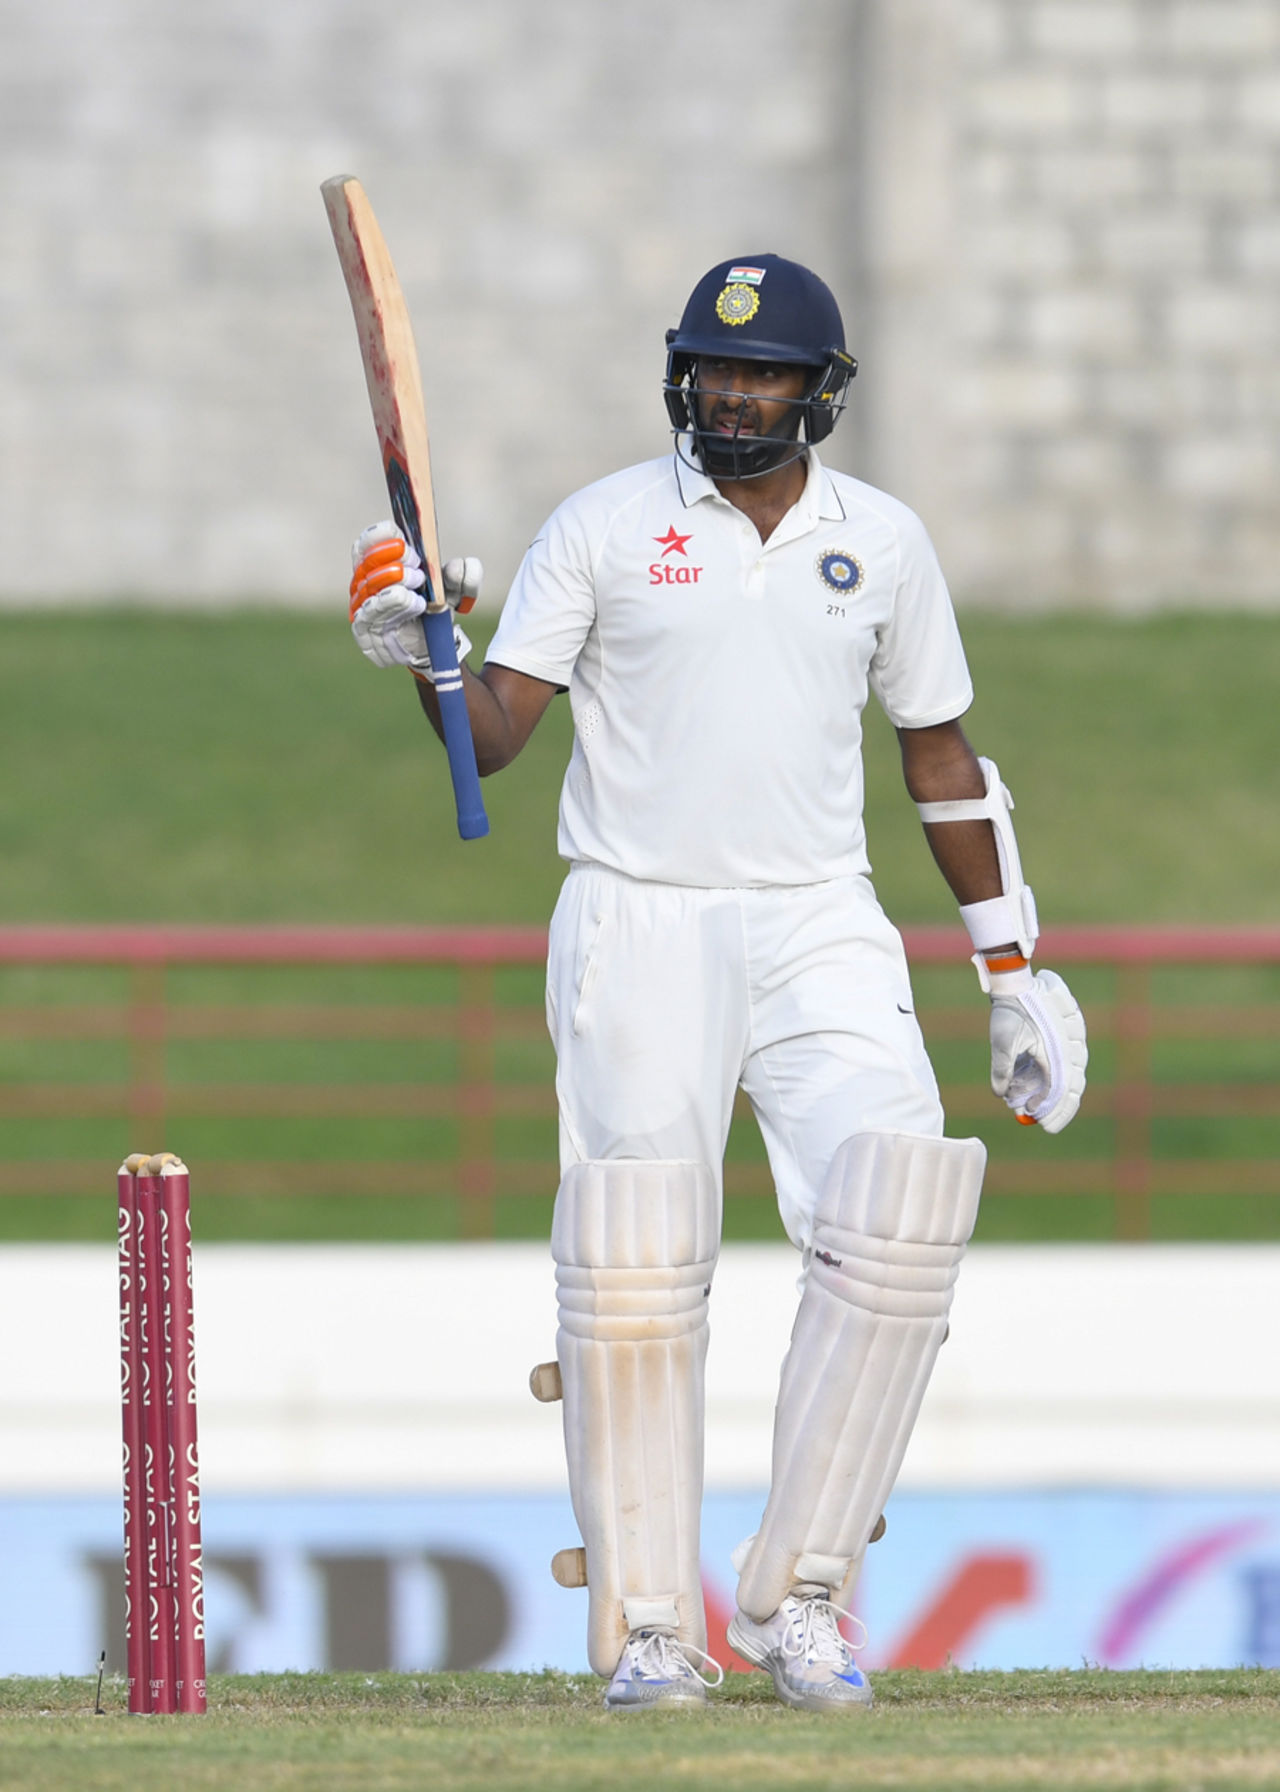 R Ashwin raises his bat after bringing up his fifty, West Indies v India, 3rd Test, Gros Islet, 1st day, August 9, 2016